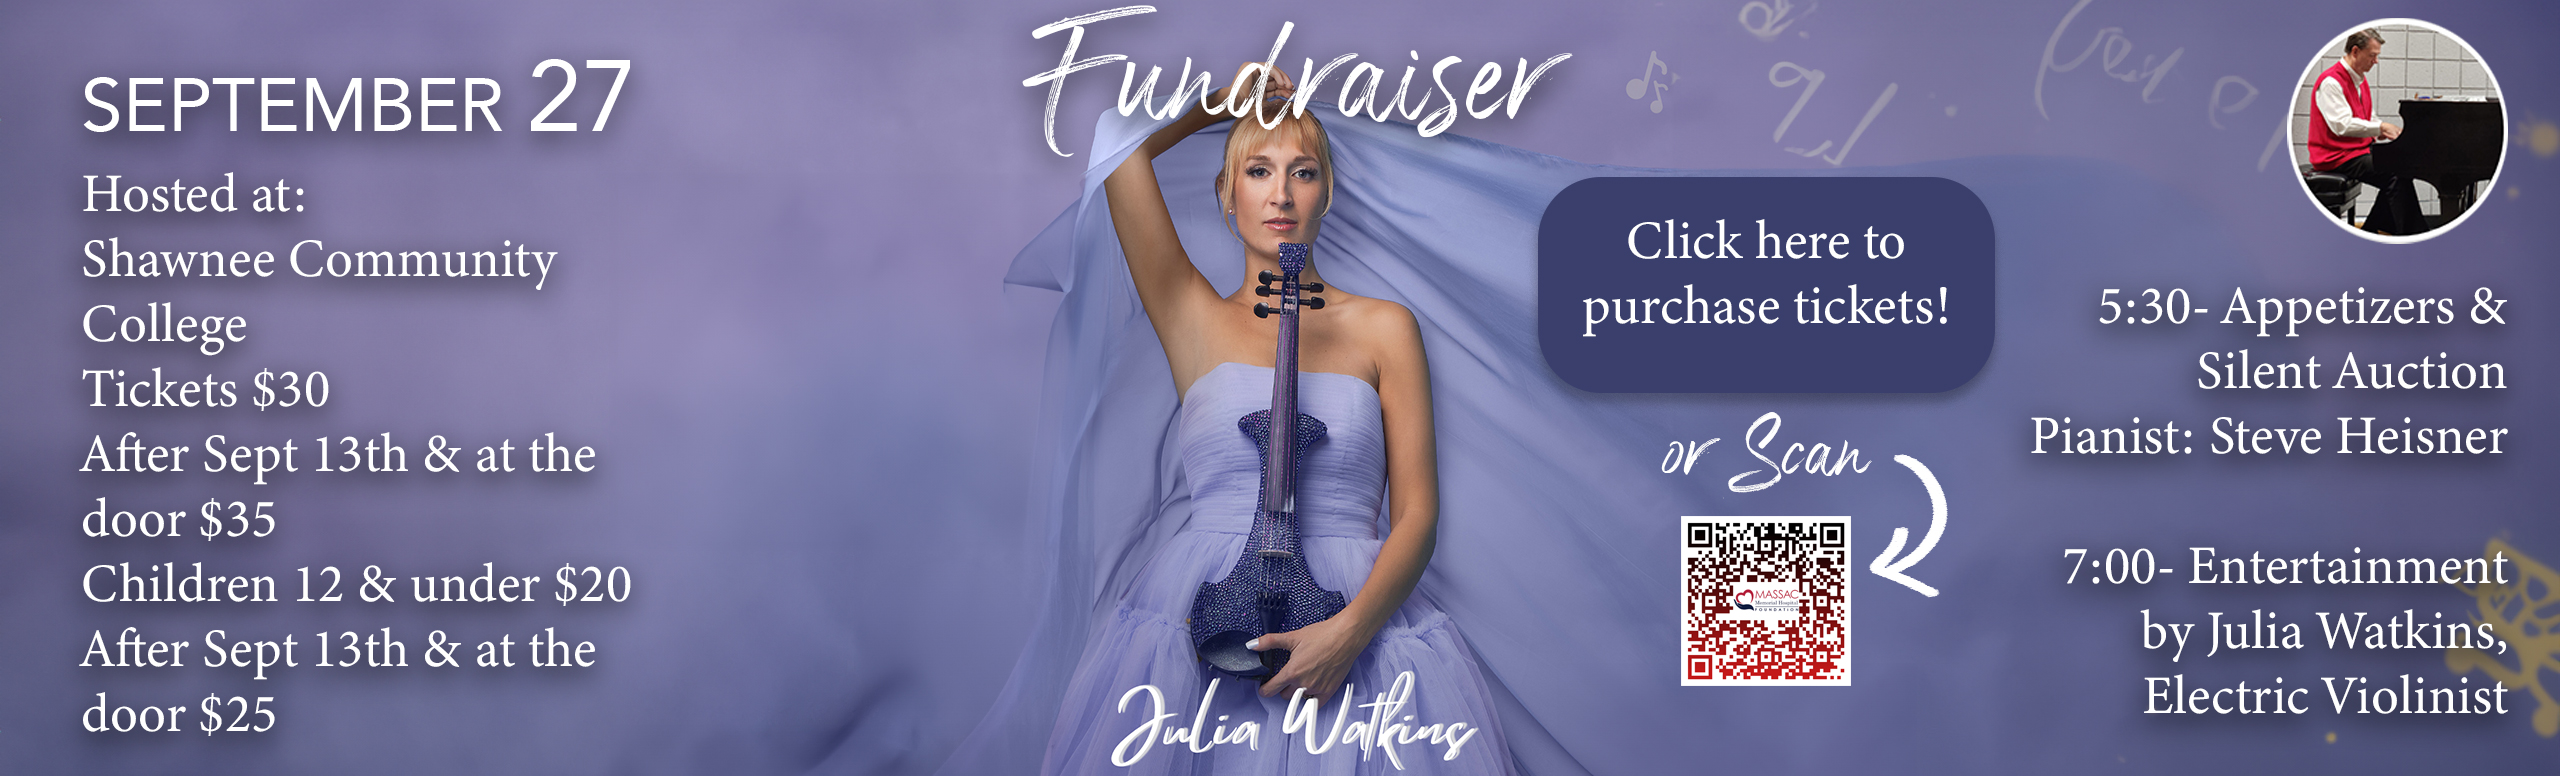 Fundraiser with Julia Watkins, the electric violinist